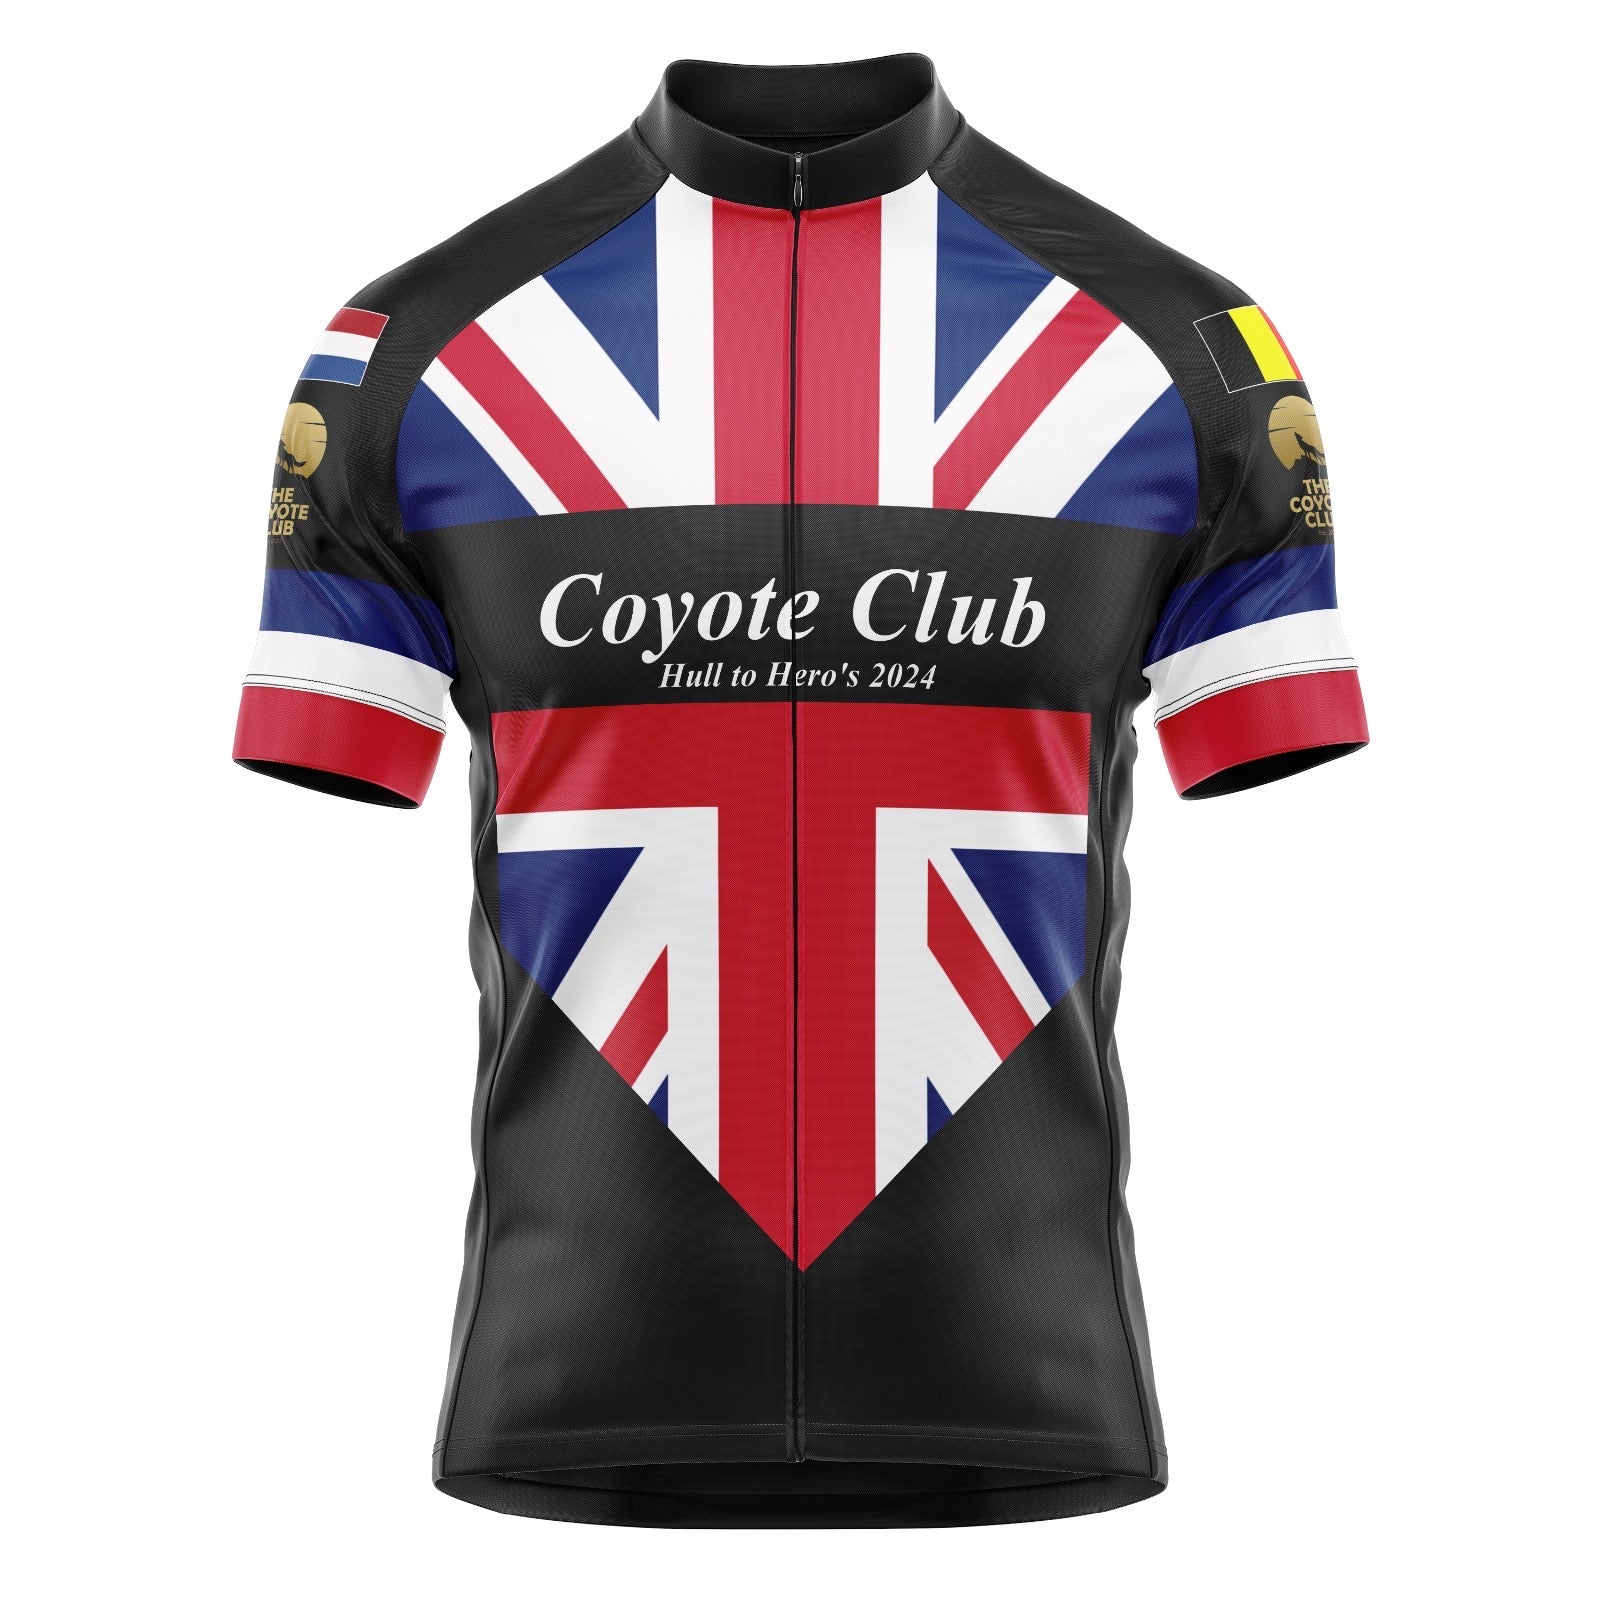 Coyote Club Cycling Top